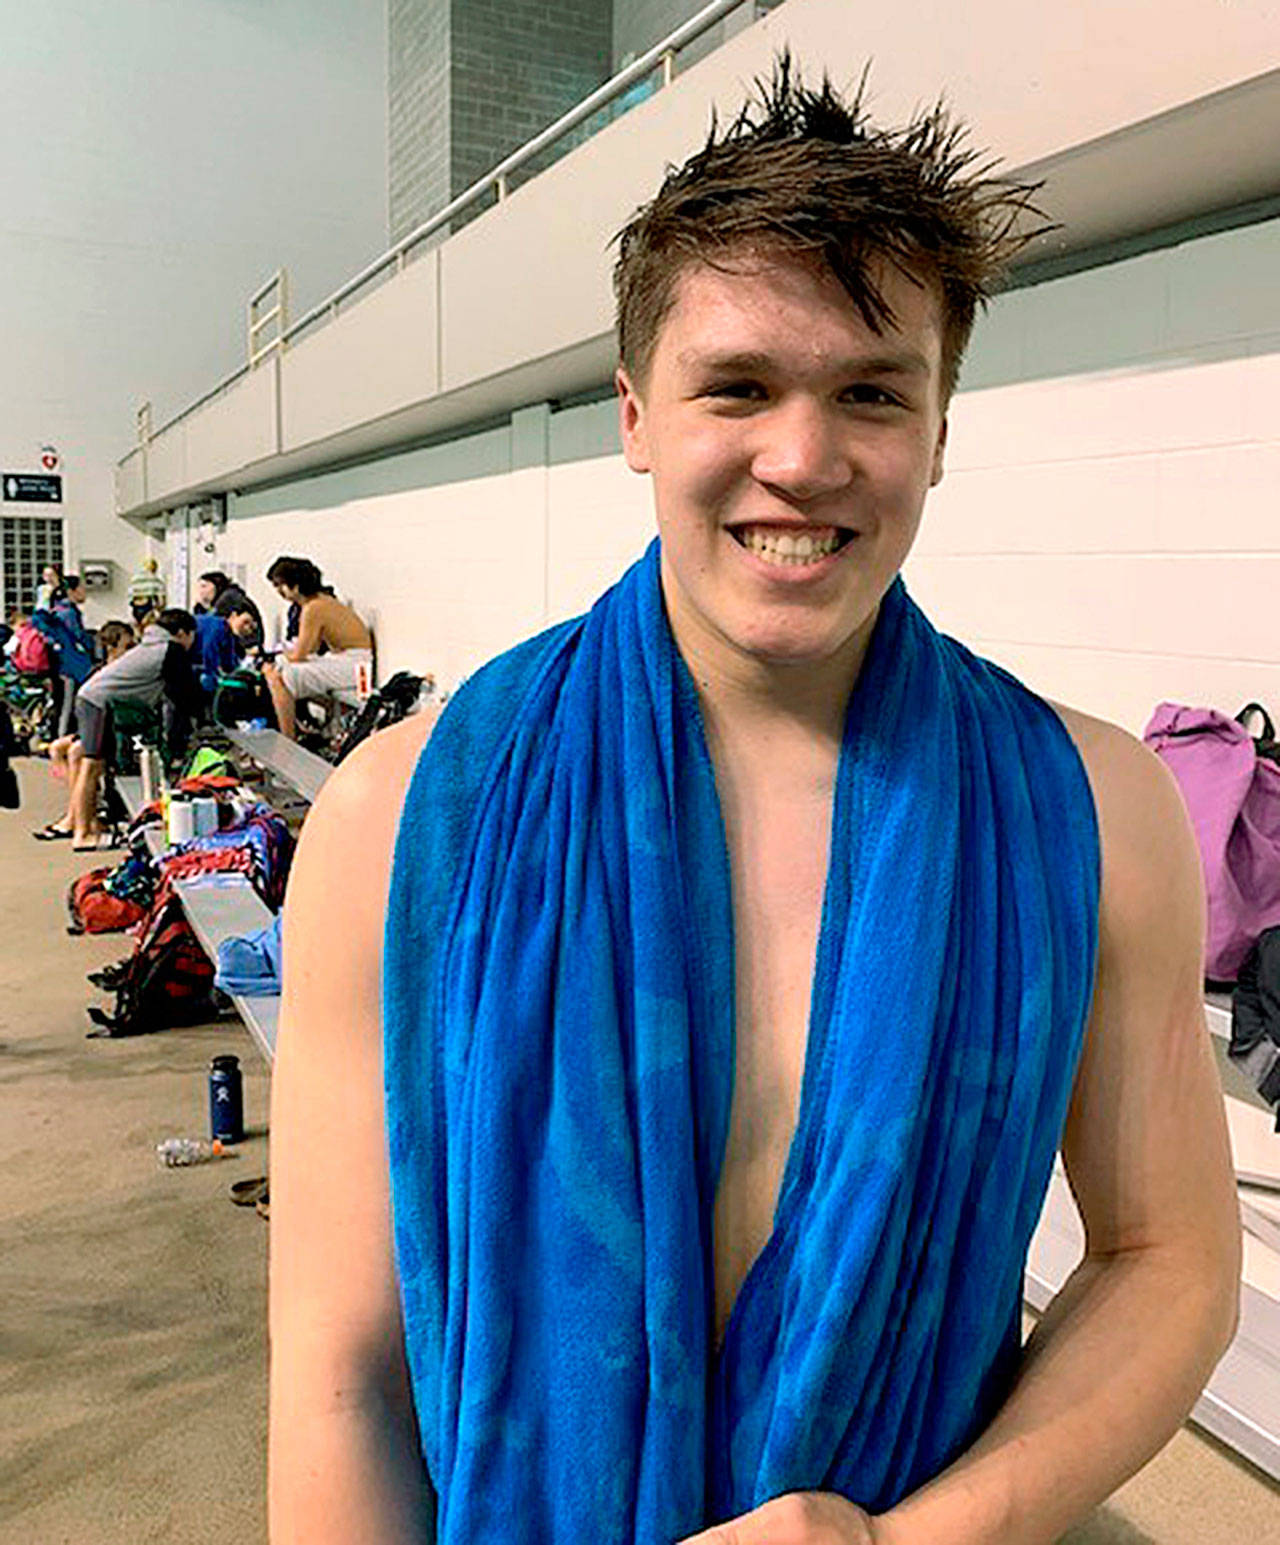 Bainbridge swimmer Kevin Houseman has qualified for the 2020 Olympic Trials in the 100-meter breaststroke. (Photo courtesy of the Bainbridge Island Swim Club)